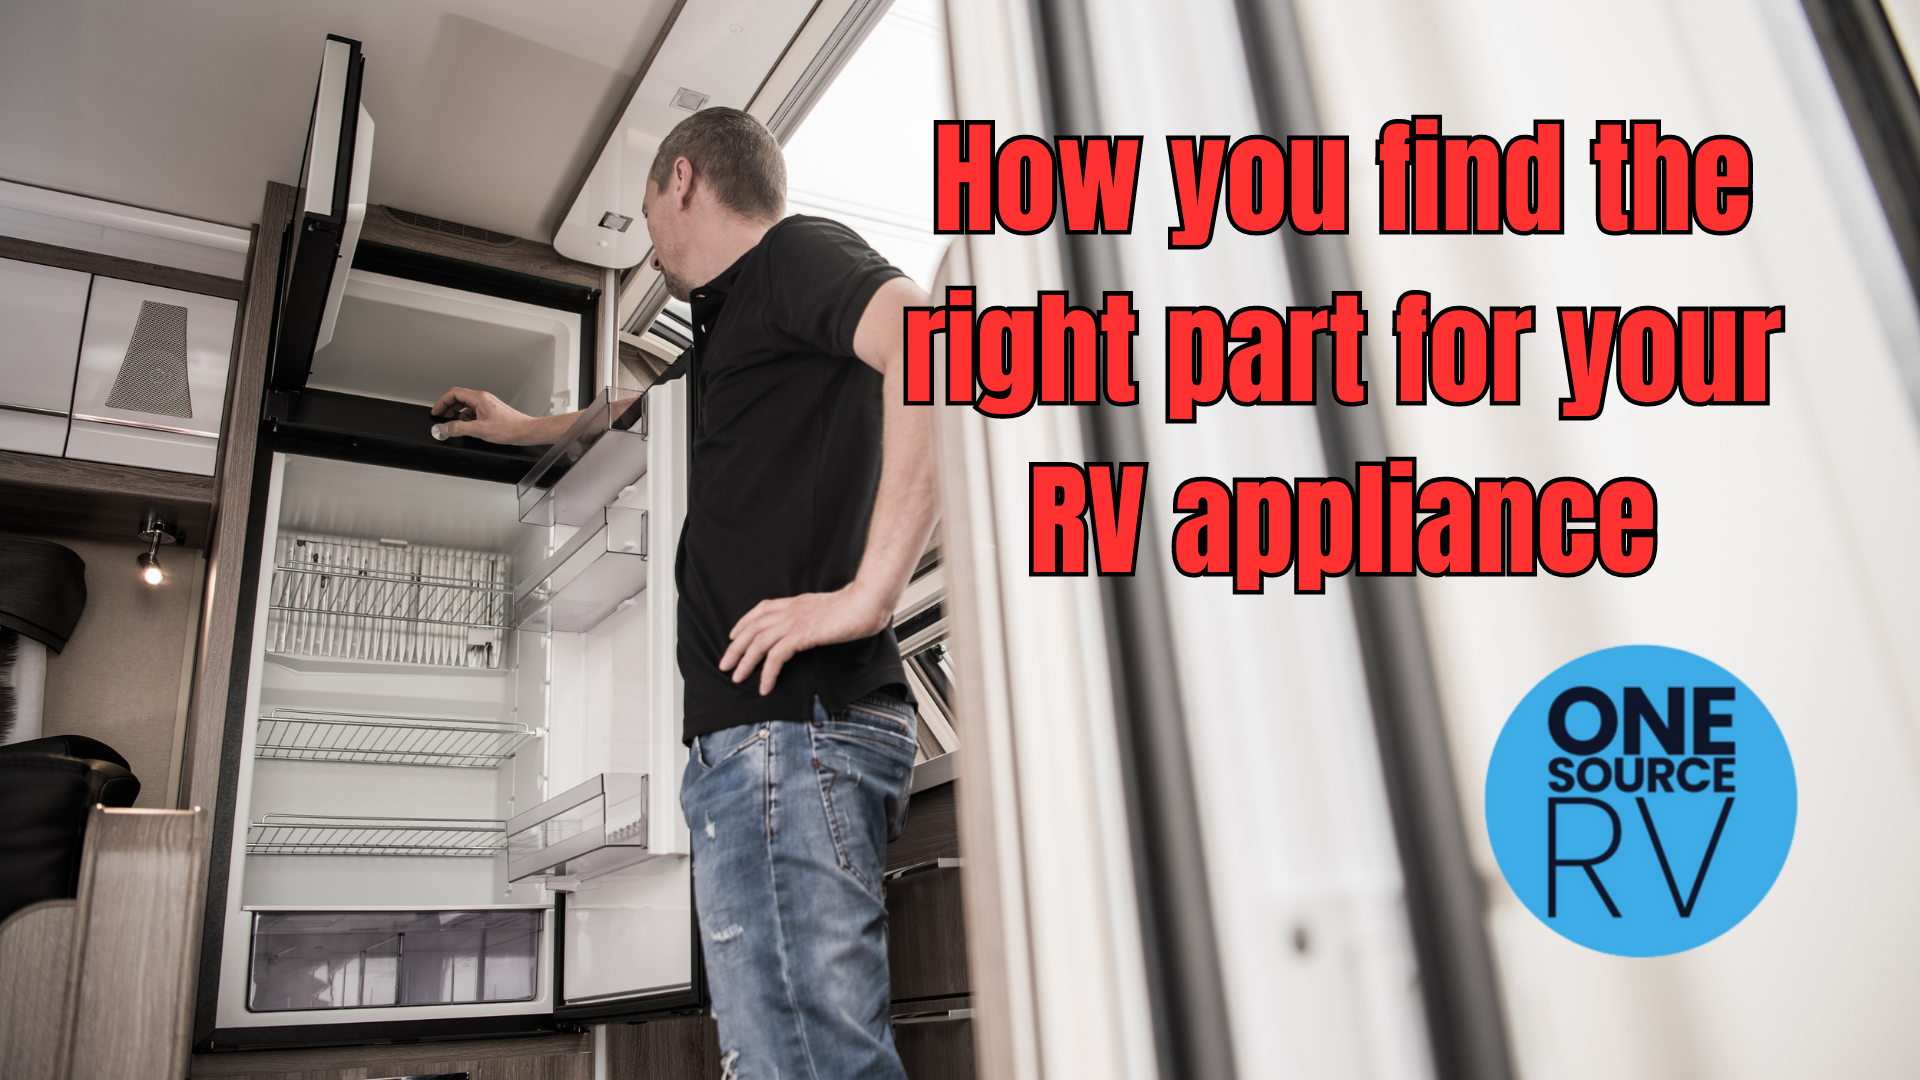 How you find the right part for your RV appliance